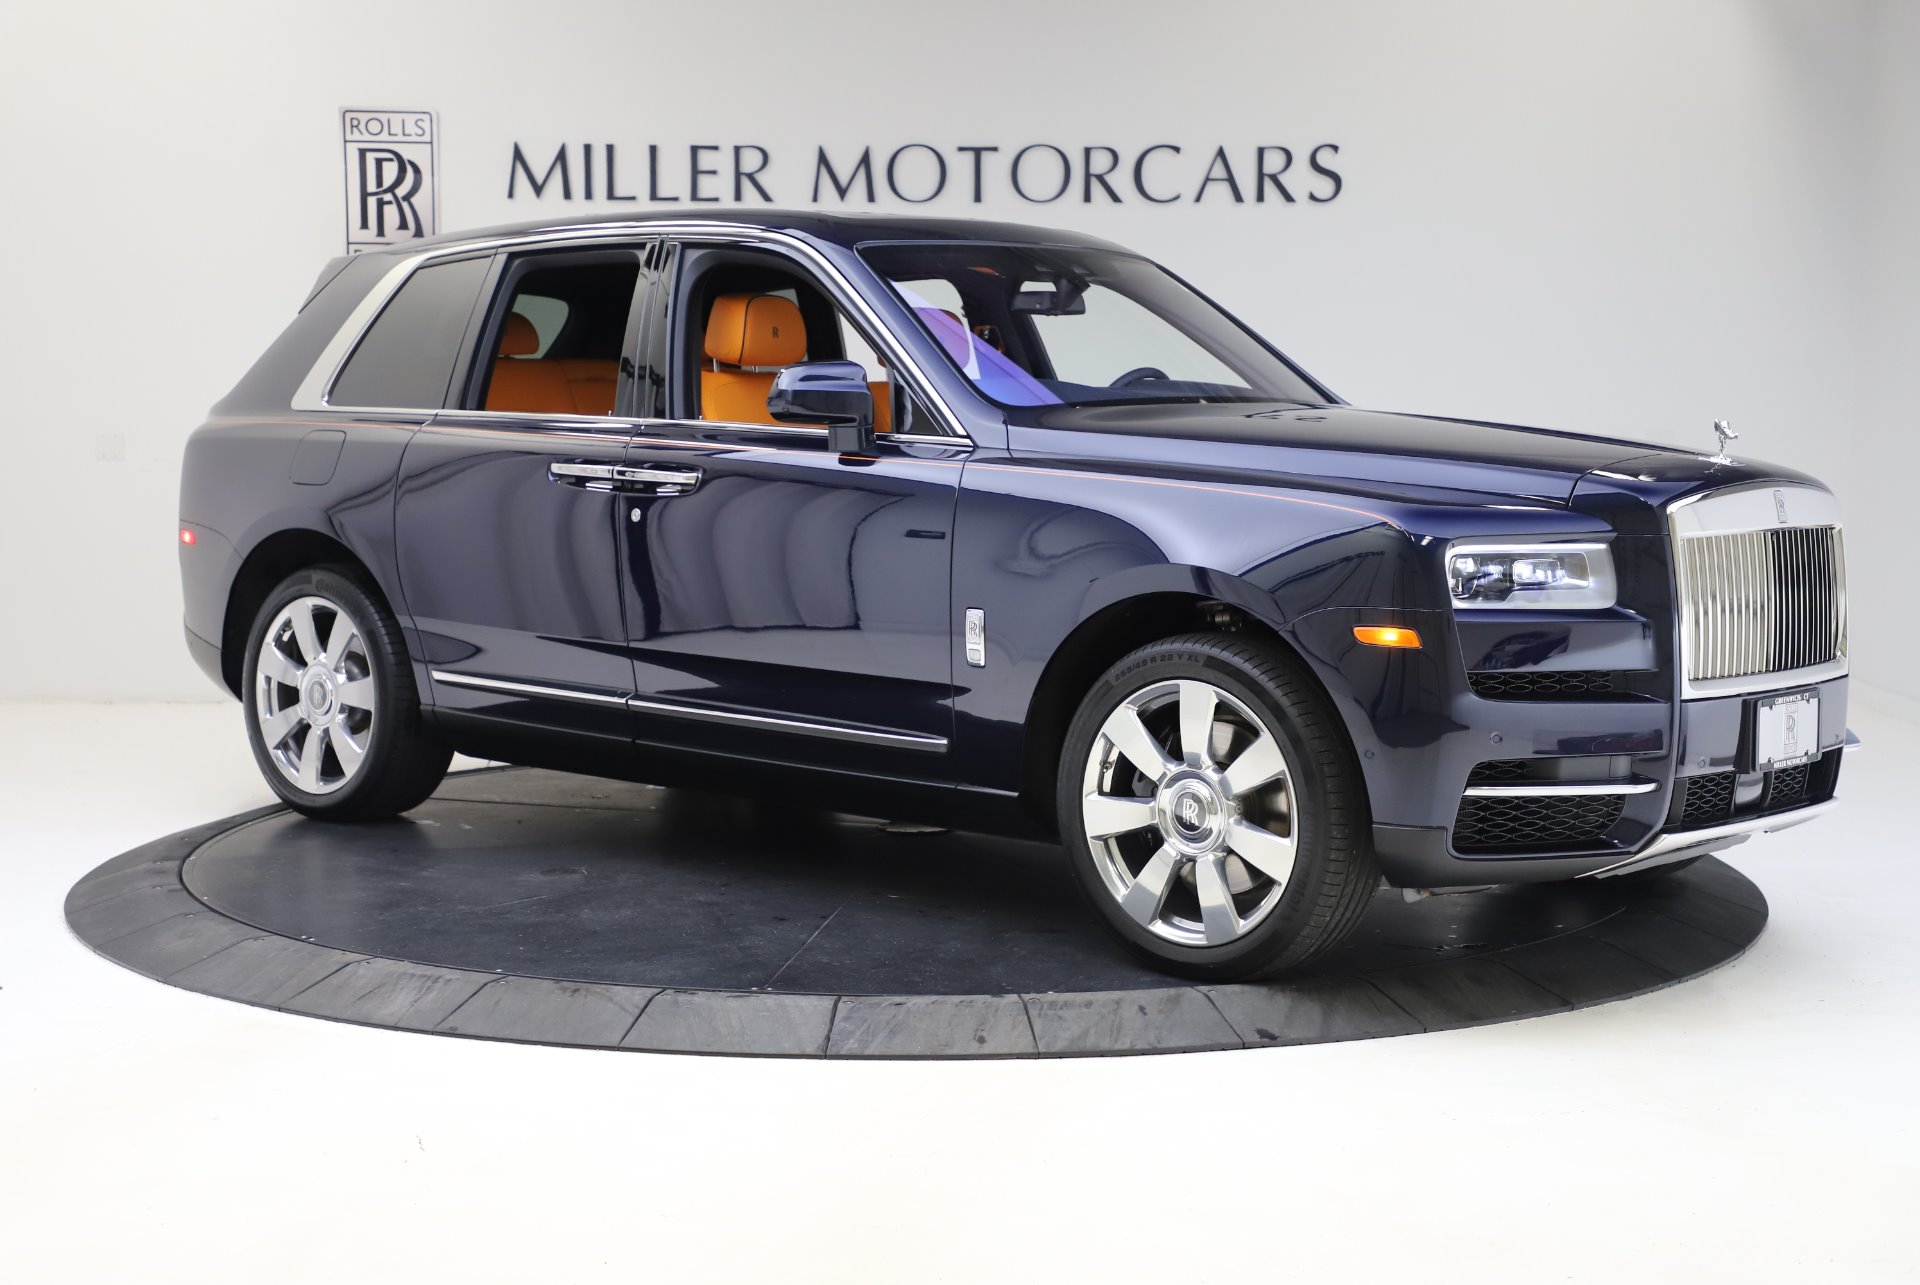 New Rolls Royce Cullinan Photos Prices And Specs in Saudi Arabia